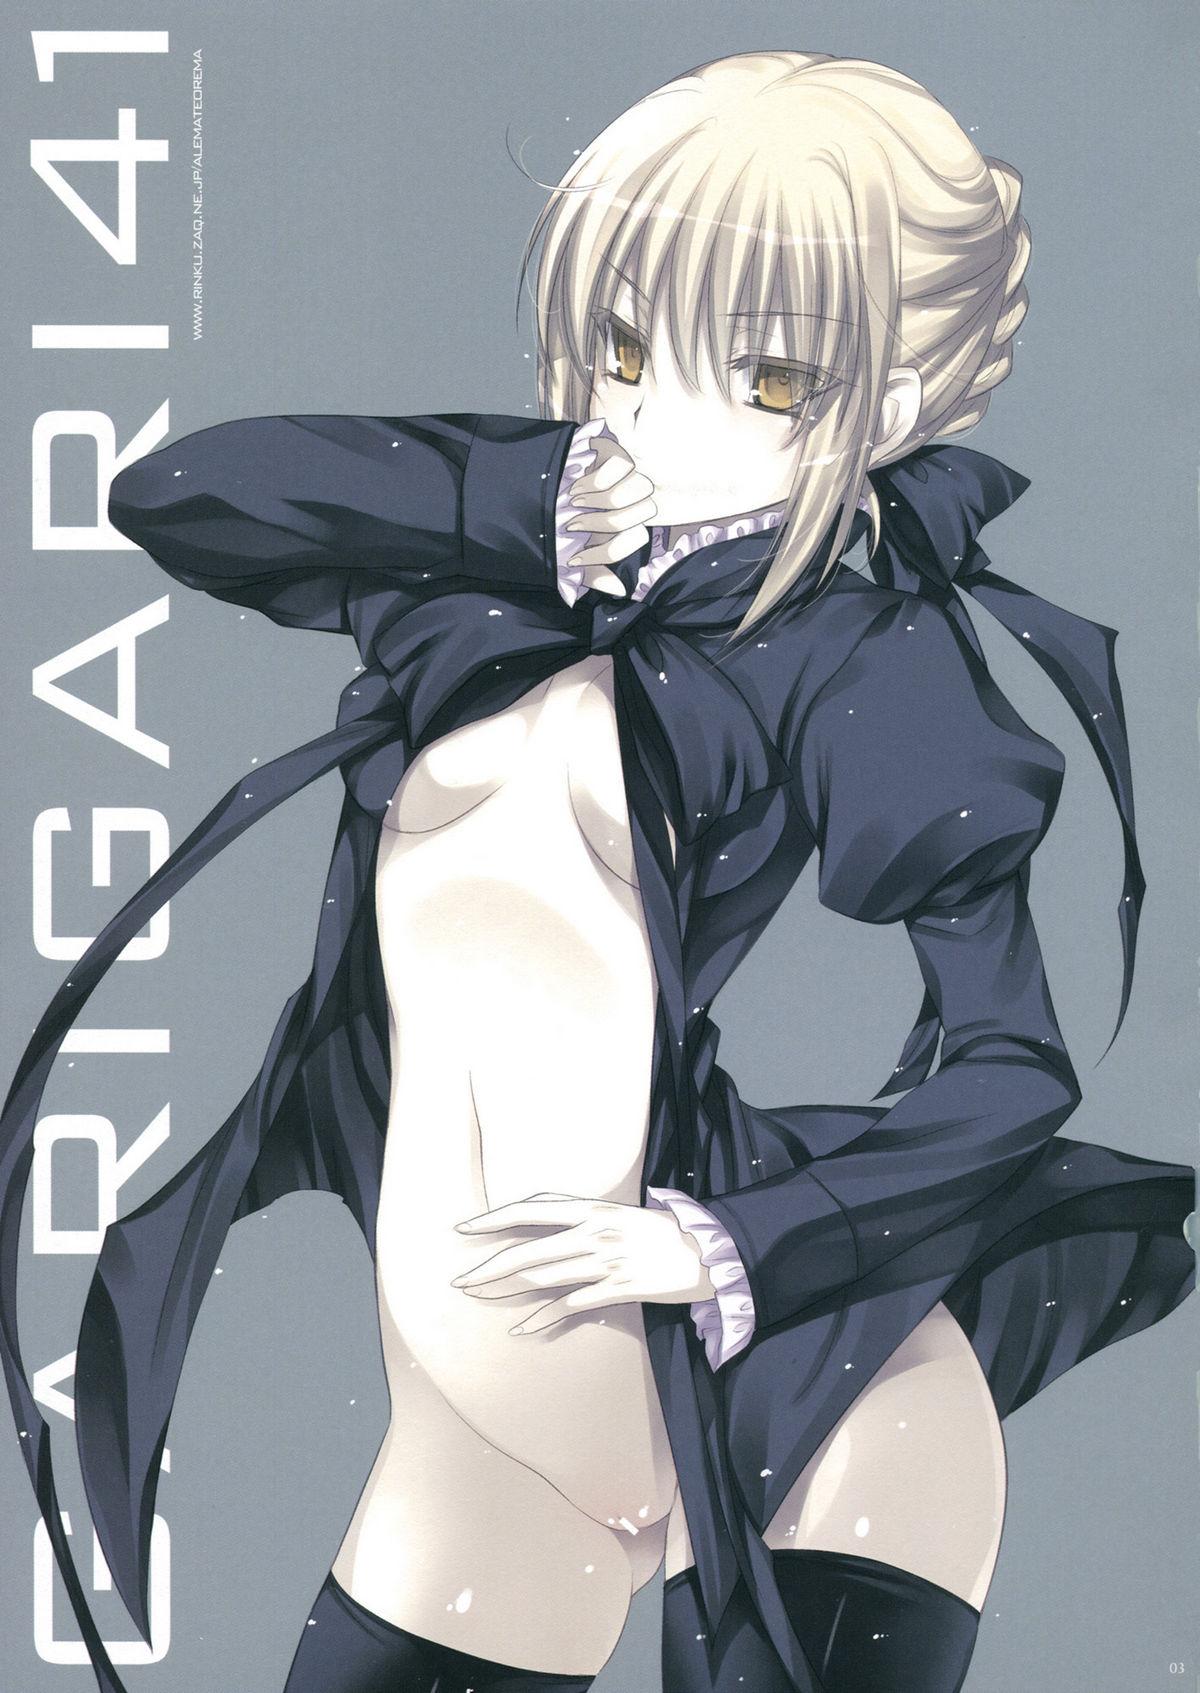 Cousin GARIGARI 41 - Fate stay night Wives - Page 2